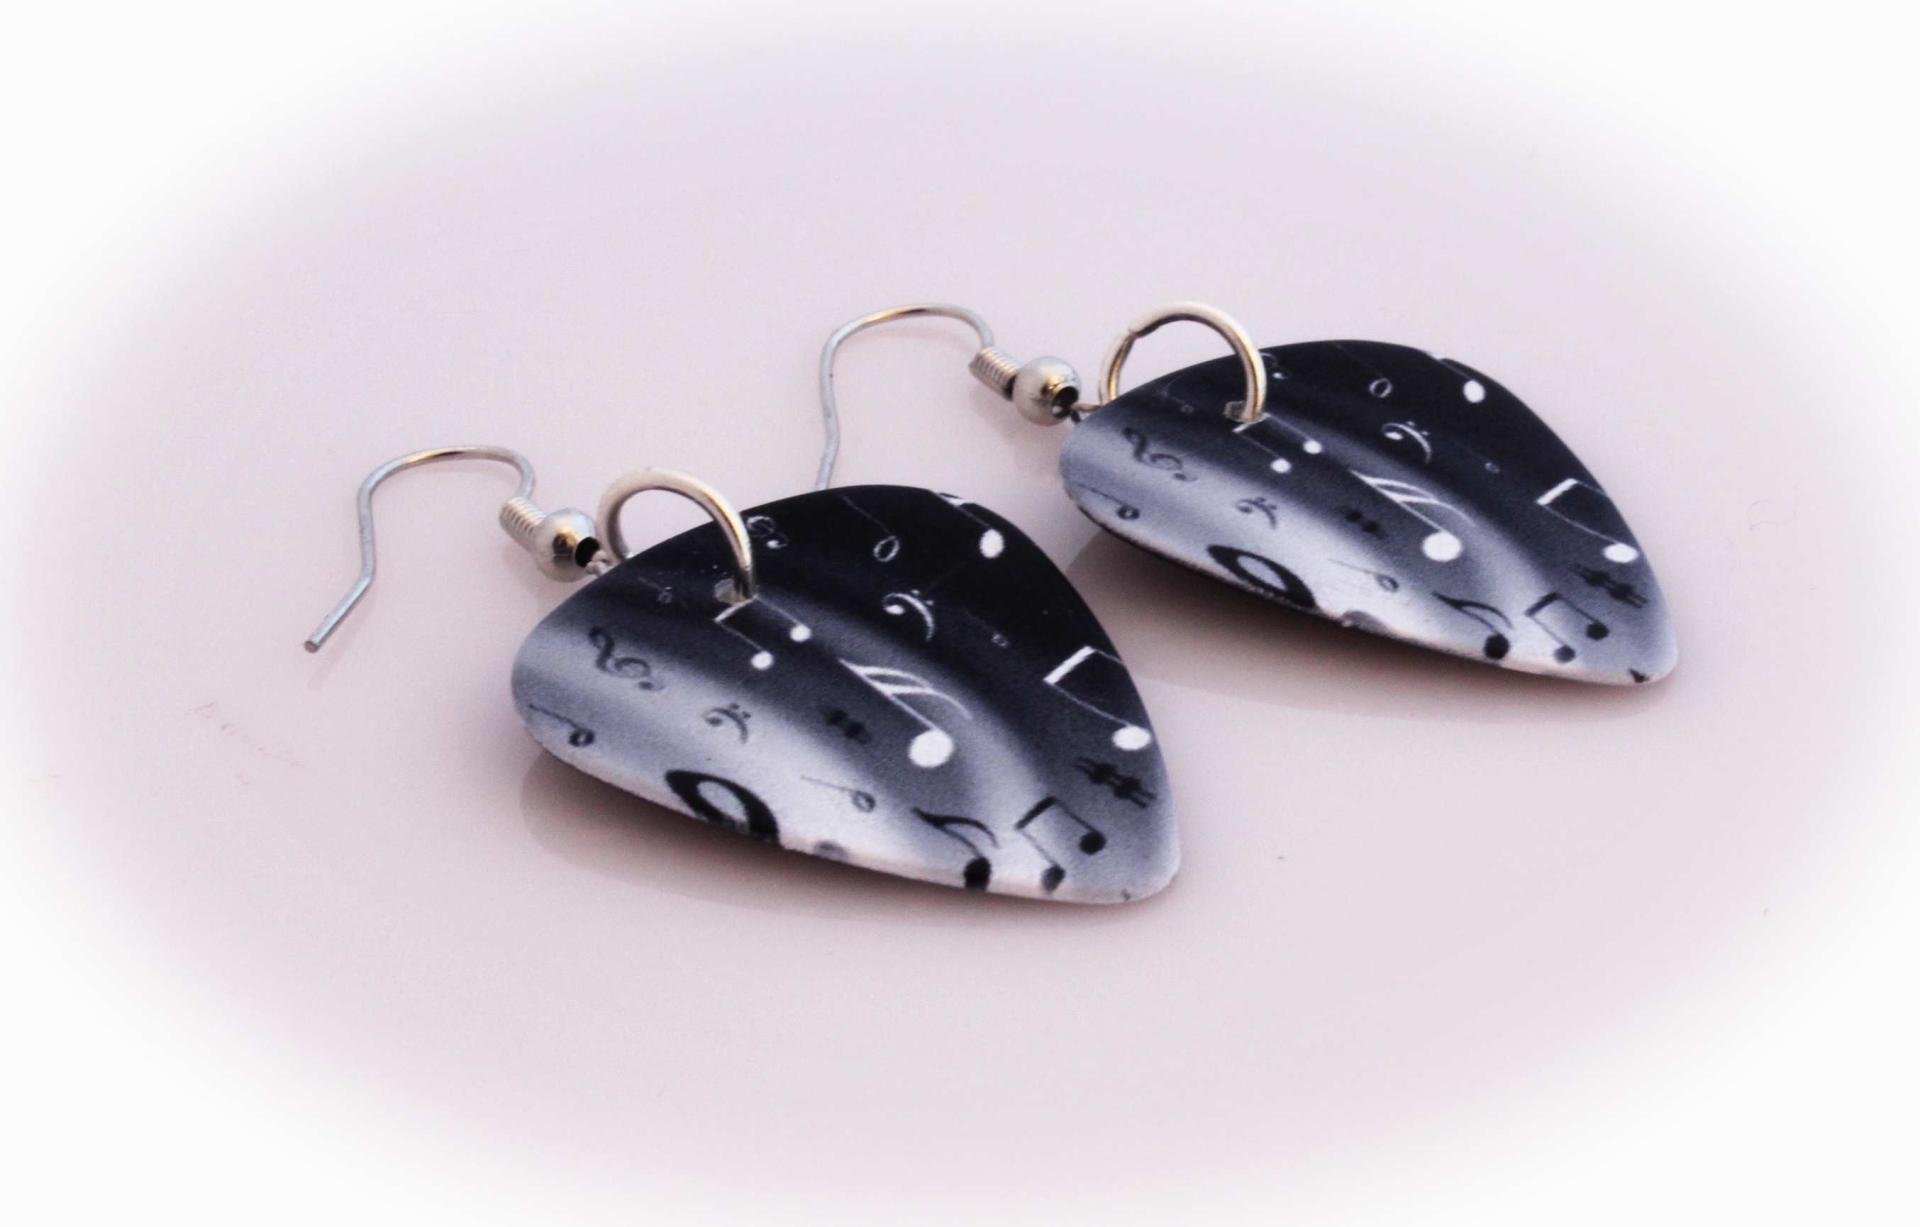 Music Note Guitar Pick Earrings - "Night & Day Notes" Design